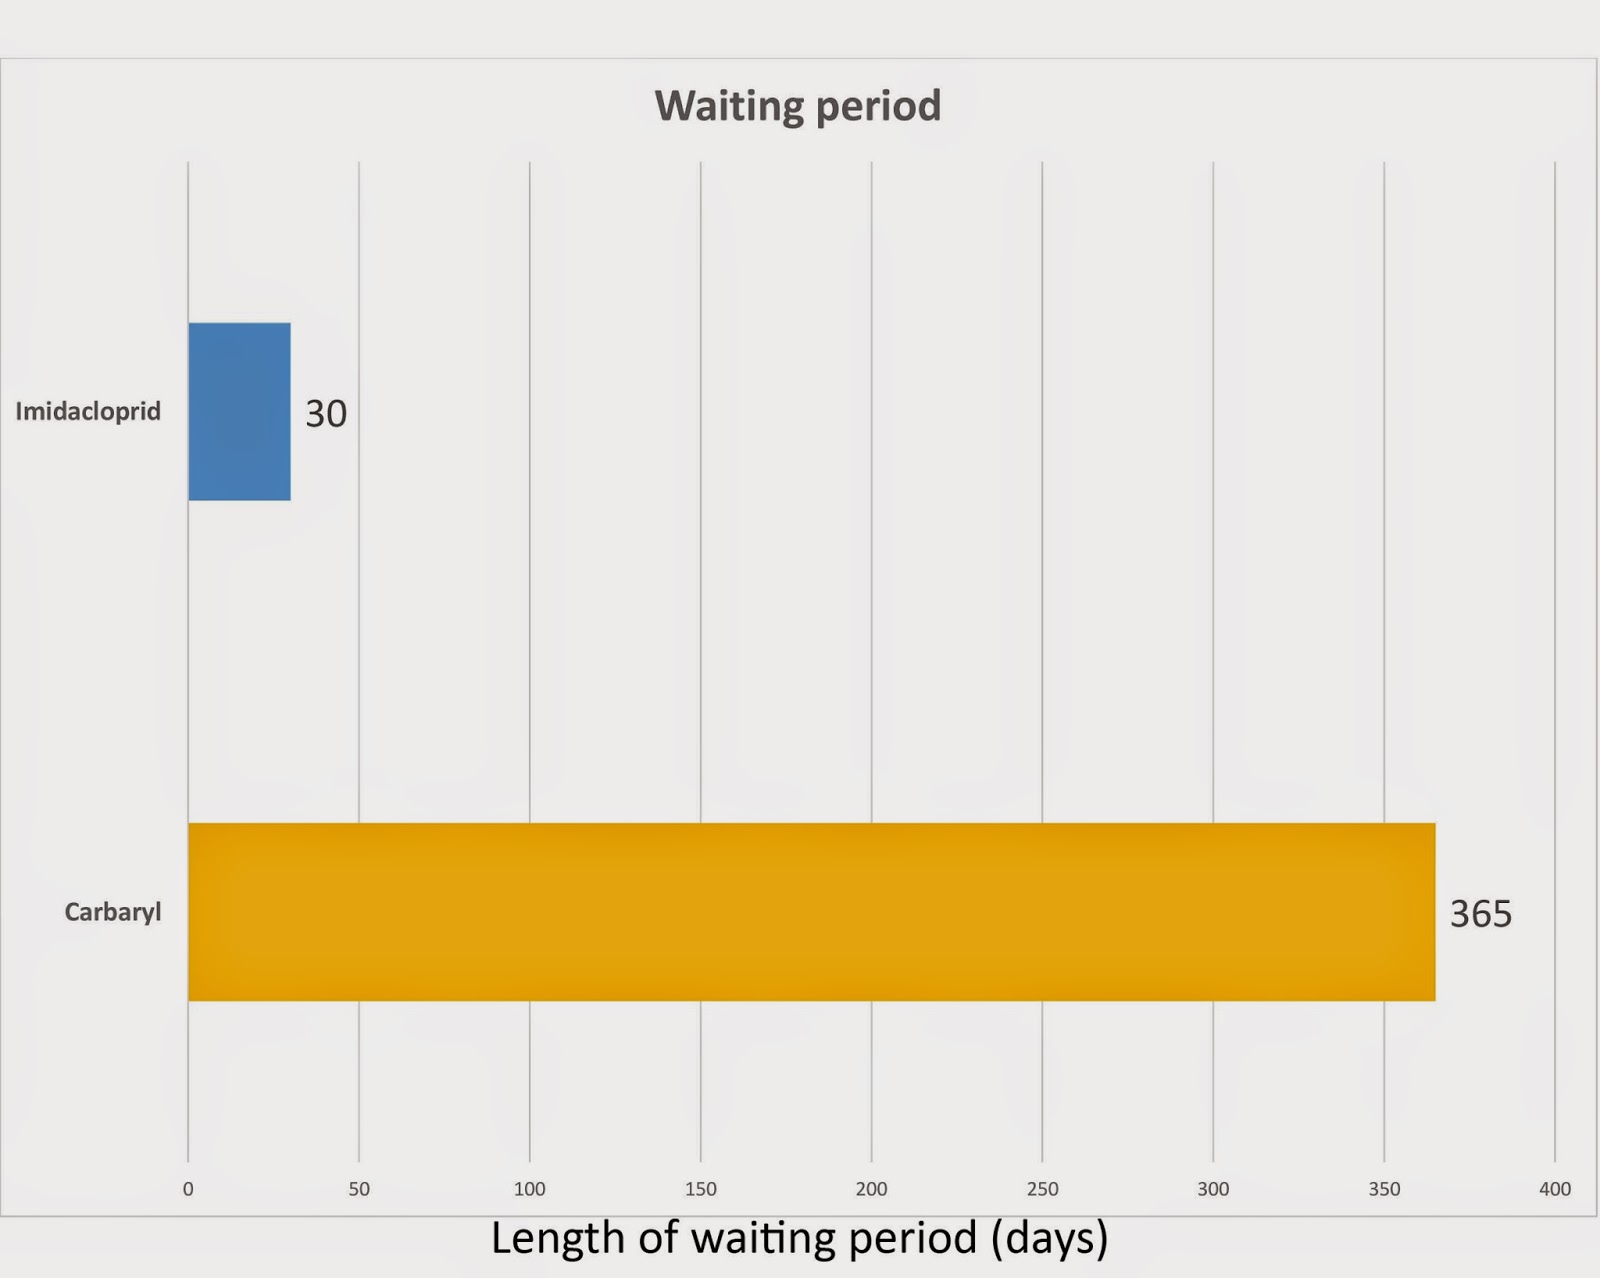 bar graph showing waiting period times for Carbaryl, 365 days, and Imidacloprid, 30 days.